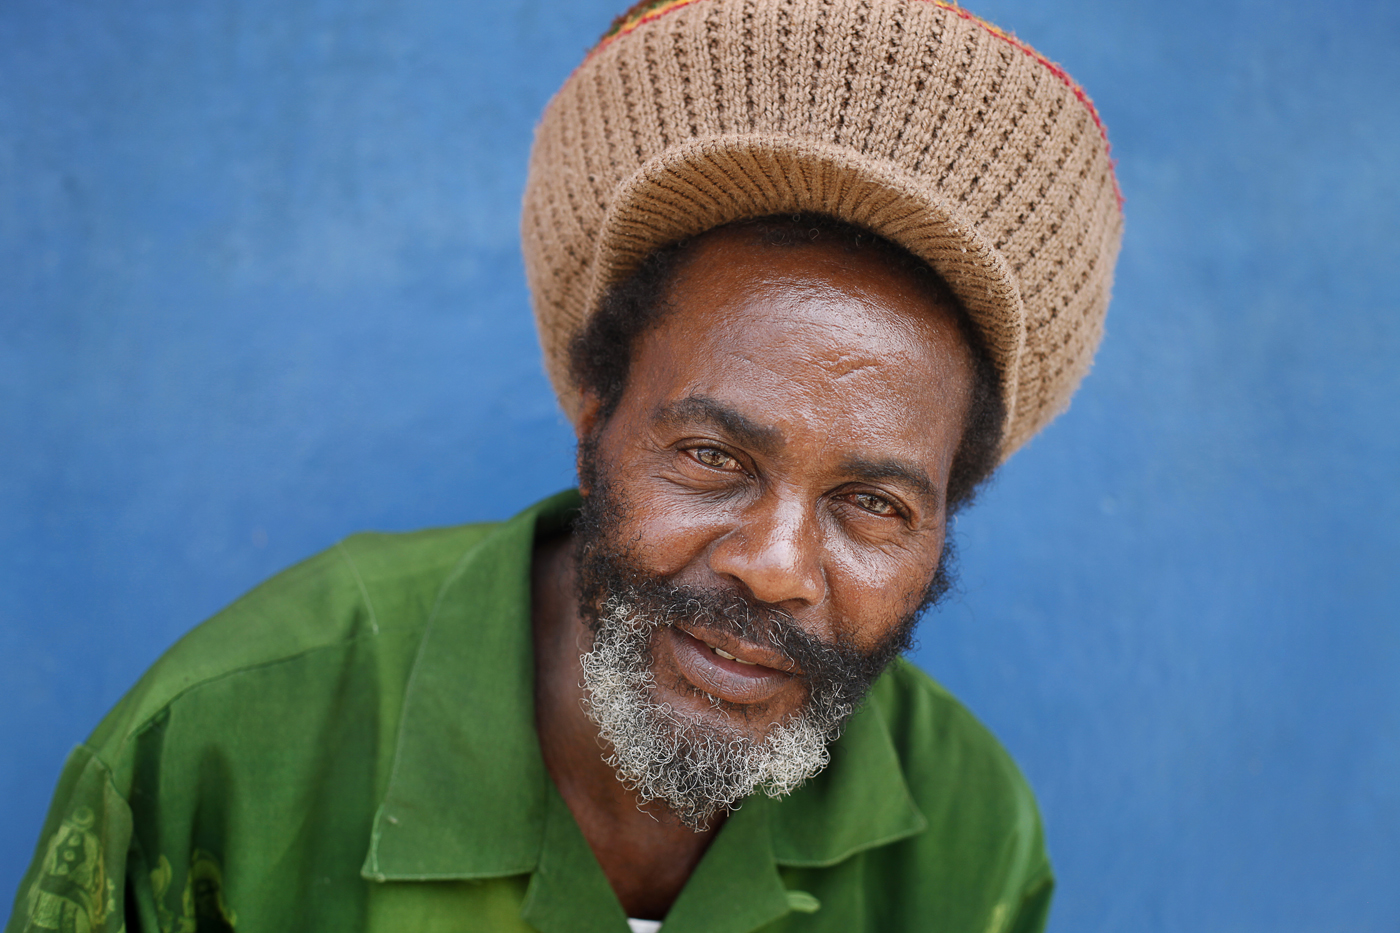 Colourful Portraits of The Jamaican People | The Lovepost